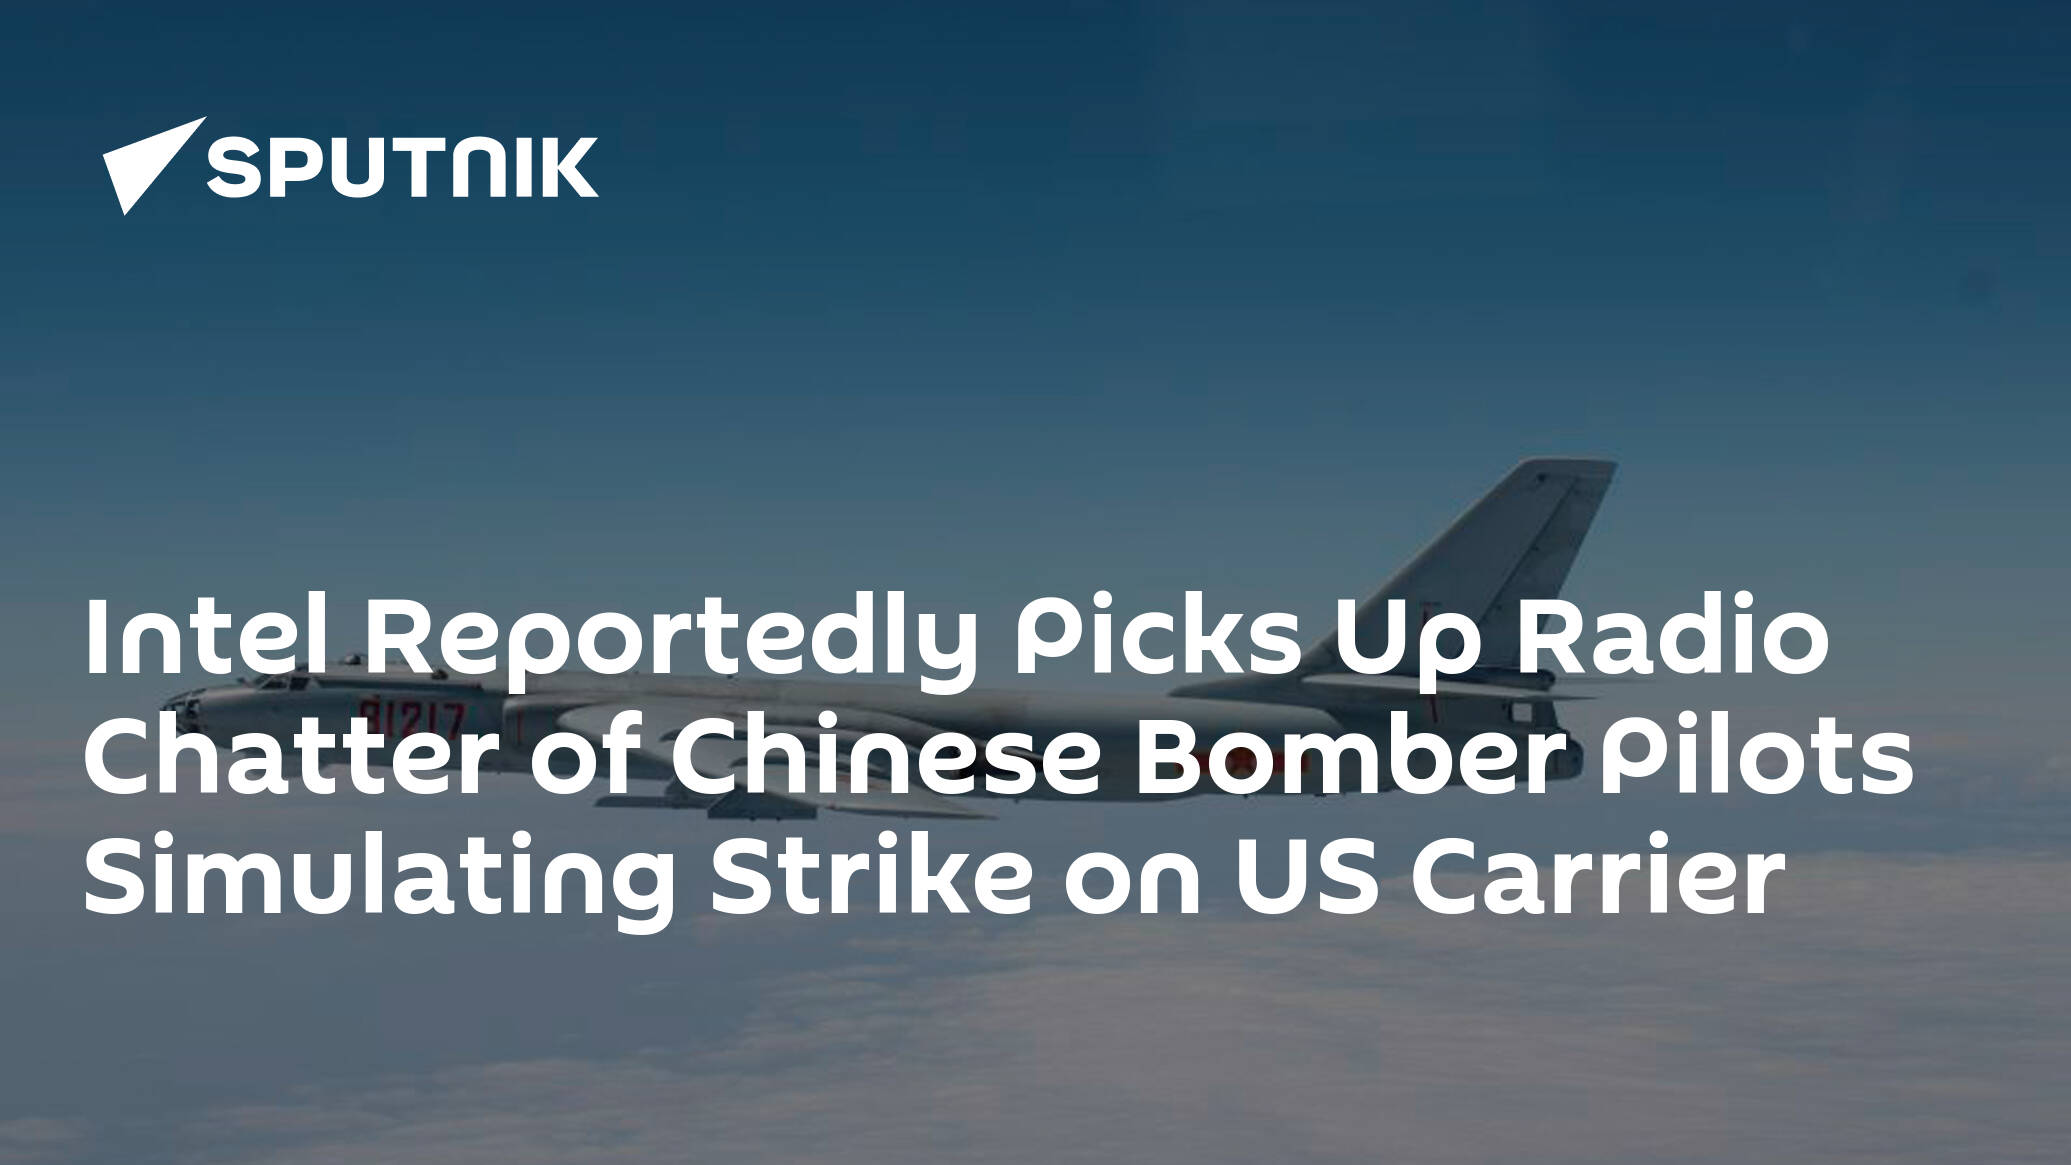 Intel Reportedly Picks Up Radio Chatter of Chinese Bomber Pilots Simulating Strike on US Carrier